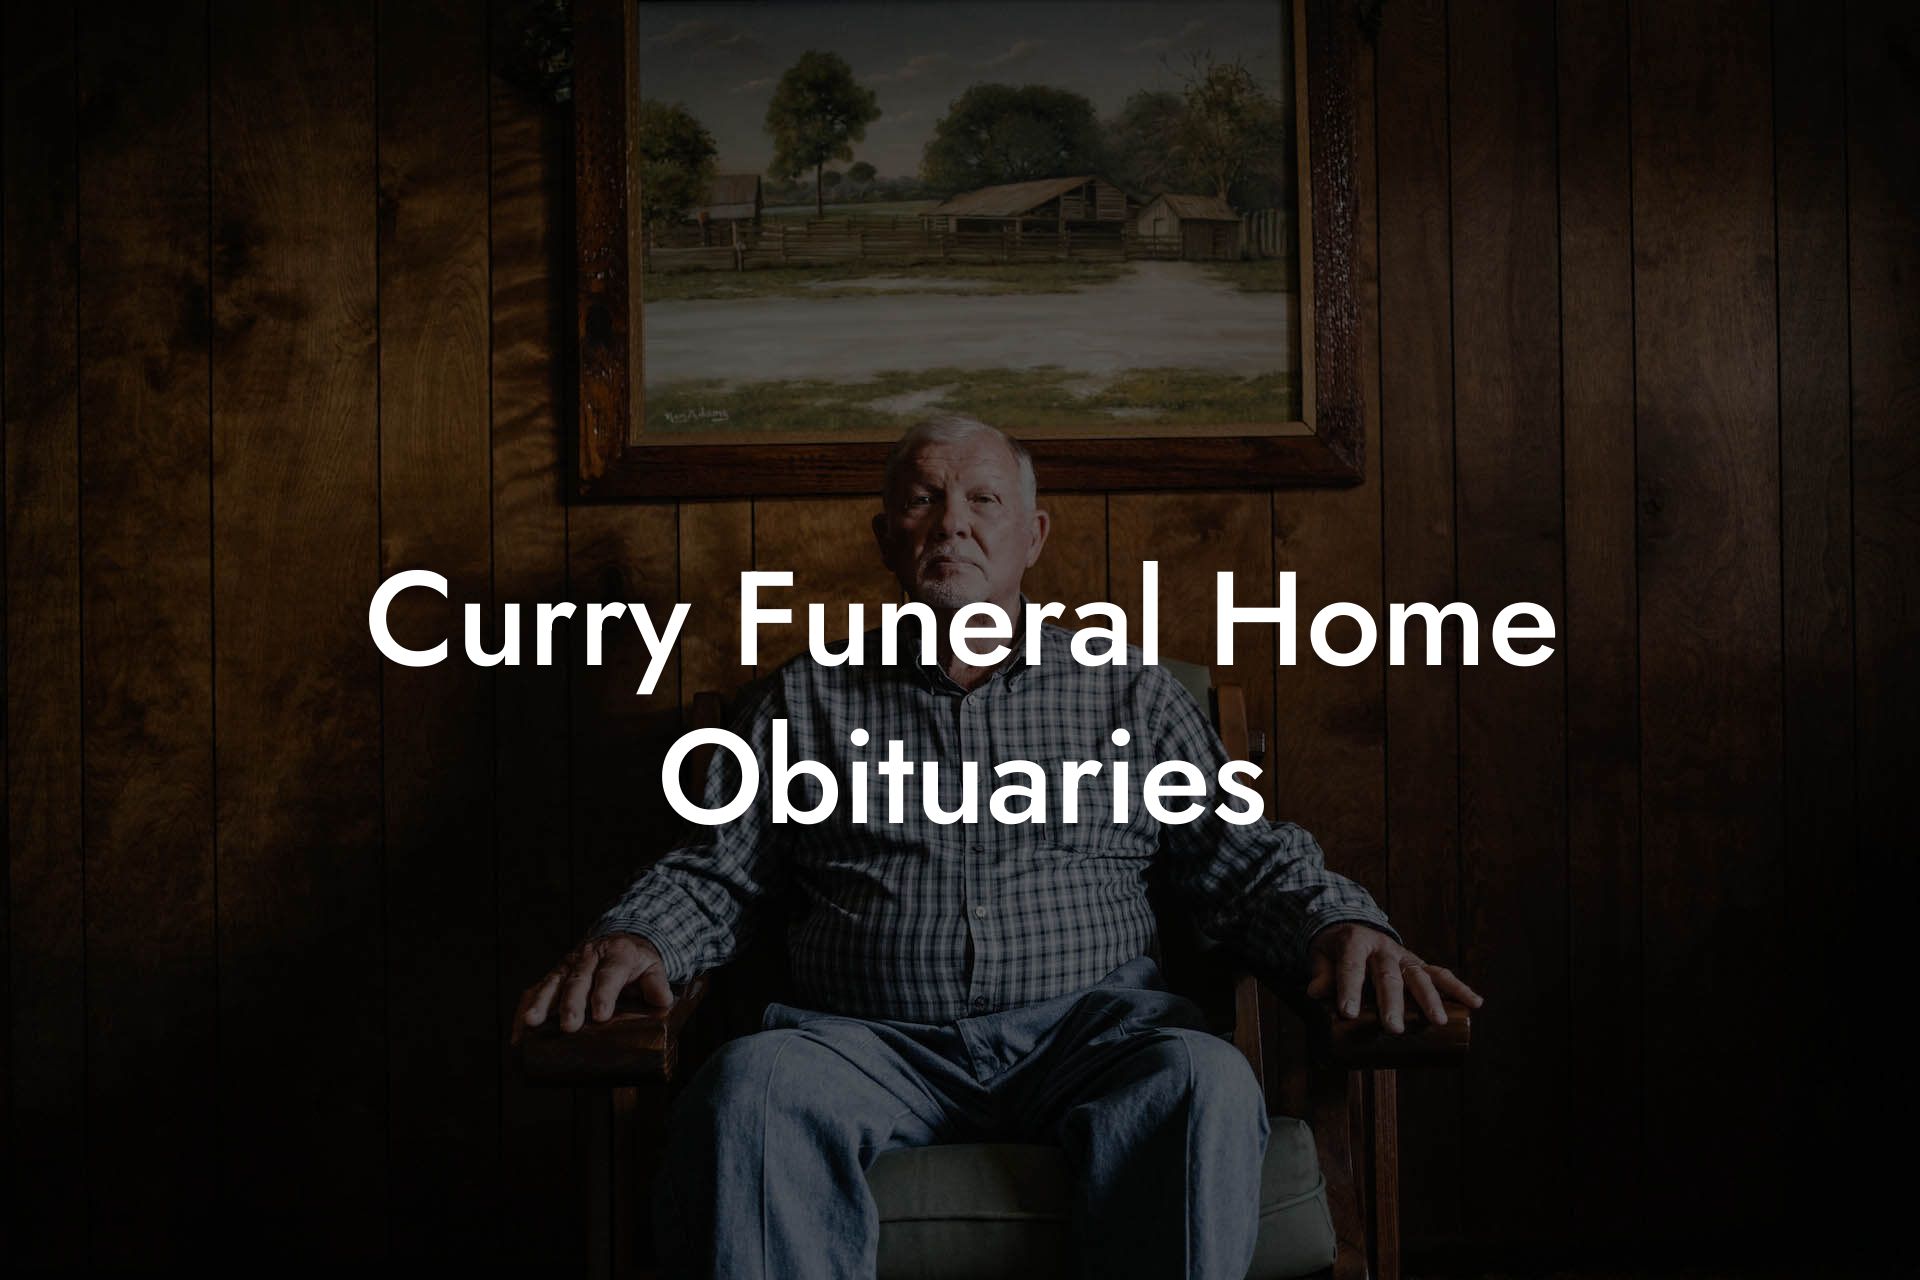 Curry Funeral Home Obituaries